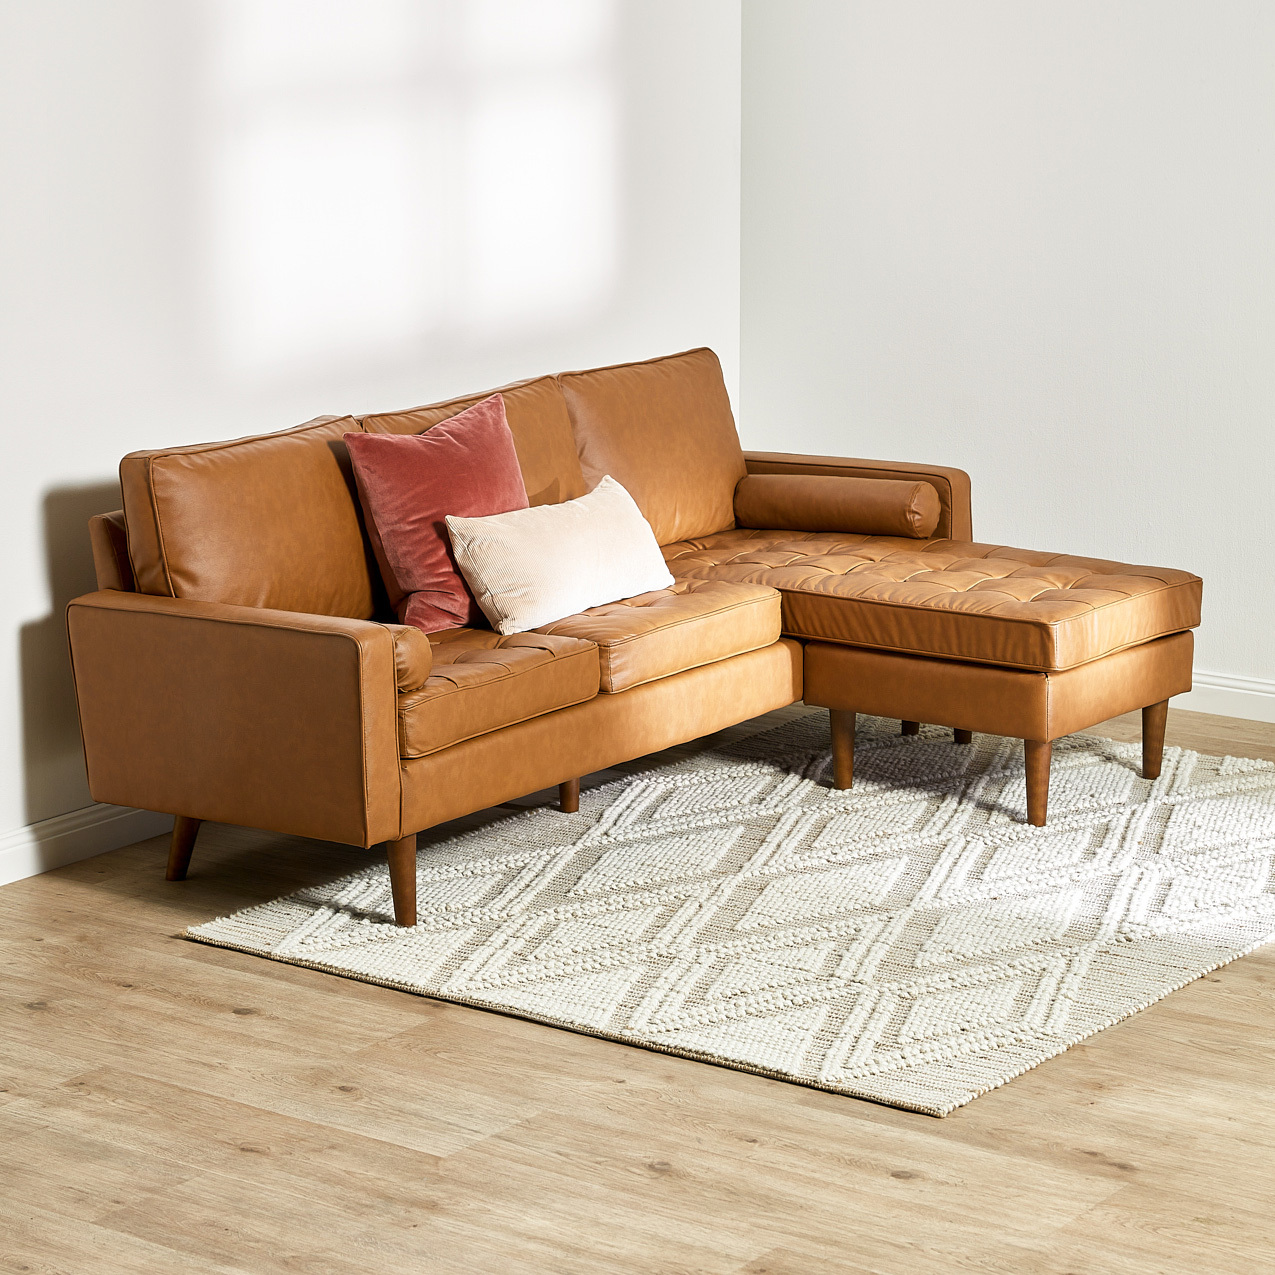 Temple Webster Tan Stockholm Faux, Faux Leather Living Room Furniture